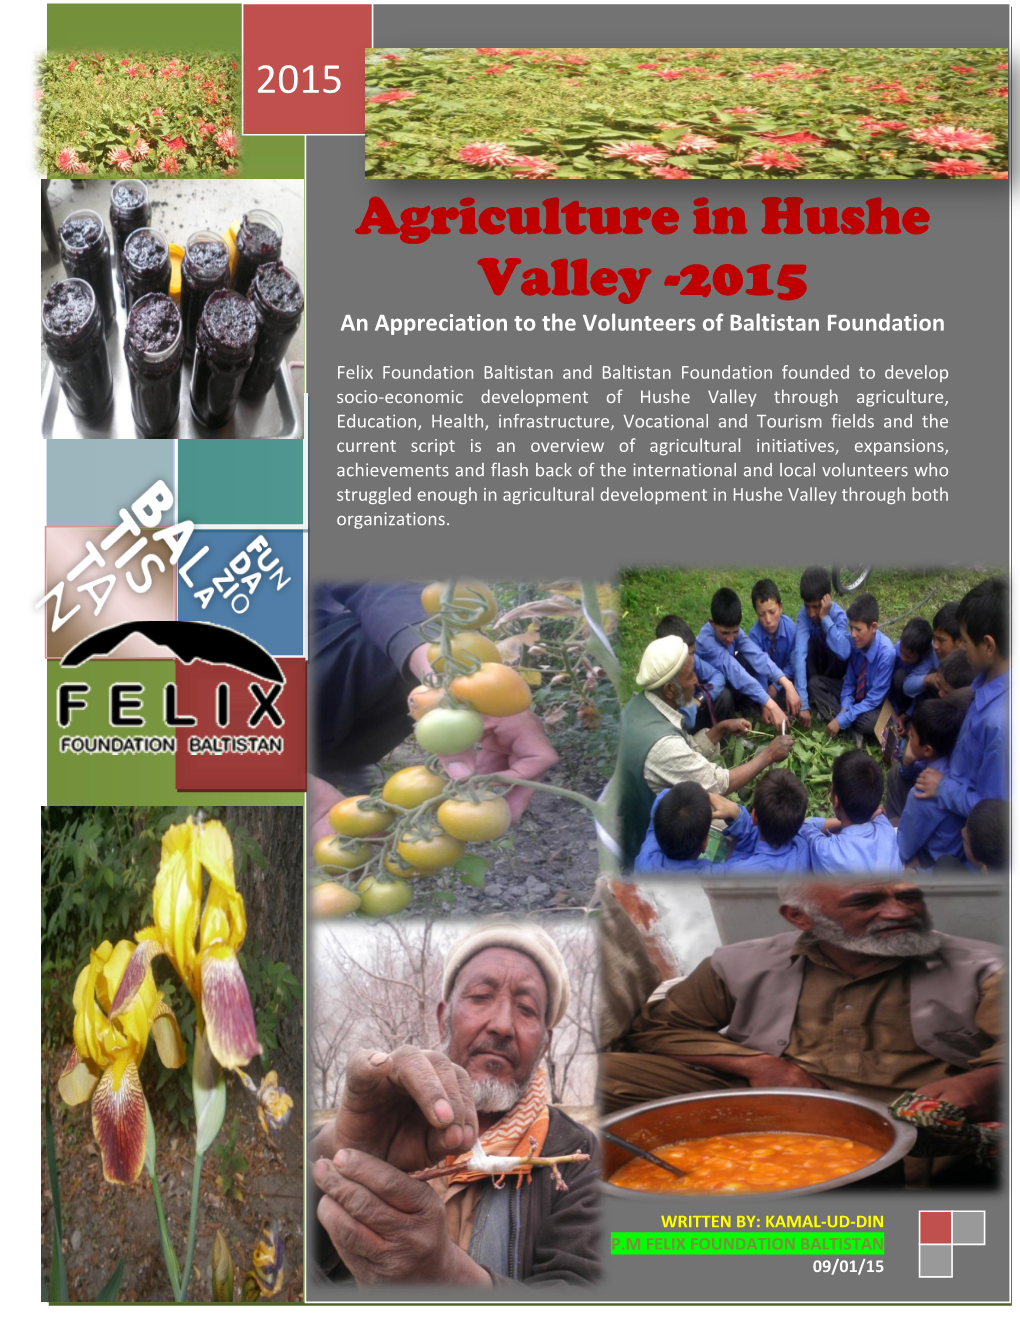 Agriculture in Hushe Valley -2015 an Appreciation to the Volunteers of Baltistan Foundation